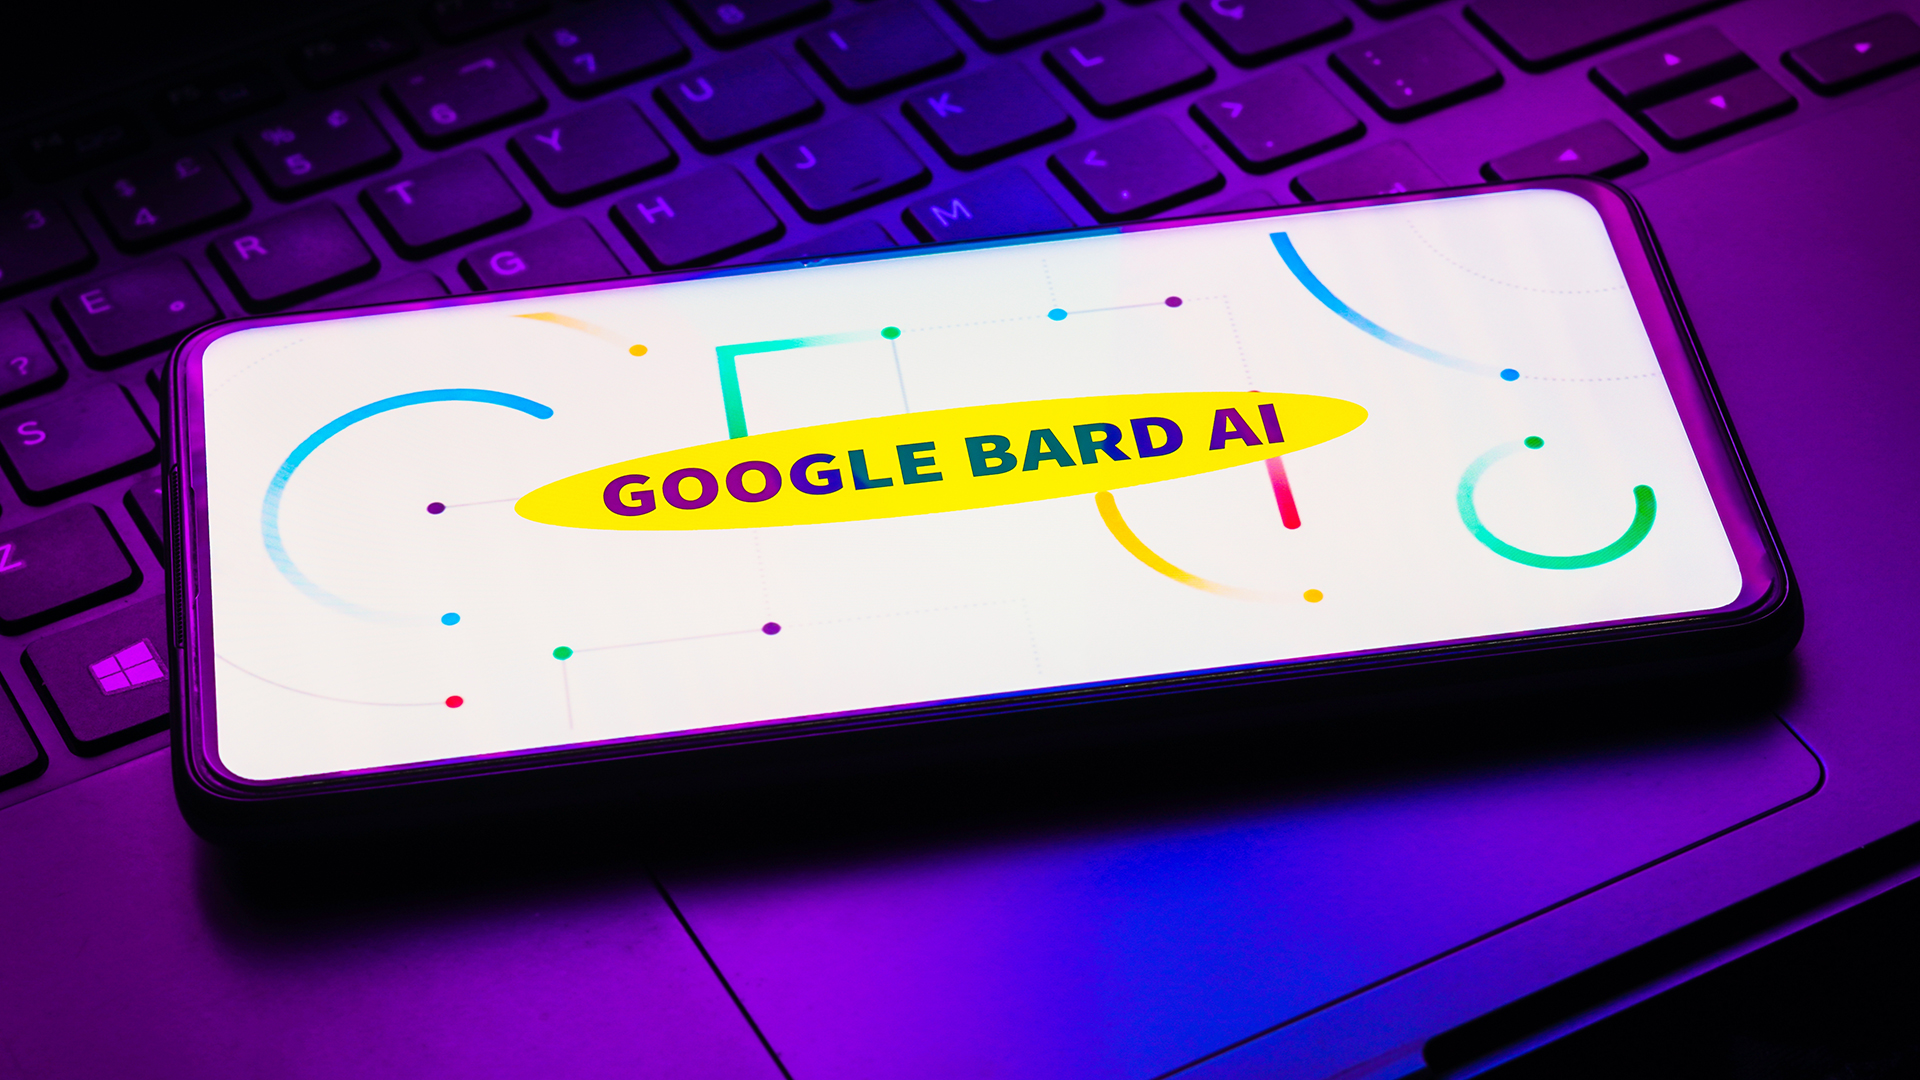 Now Google AI chatbot Bard can watch YouTube videos for you